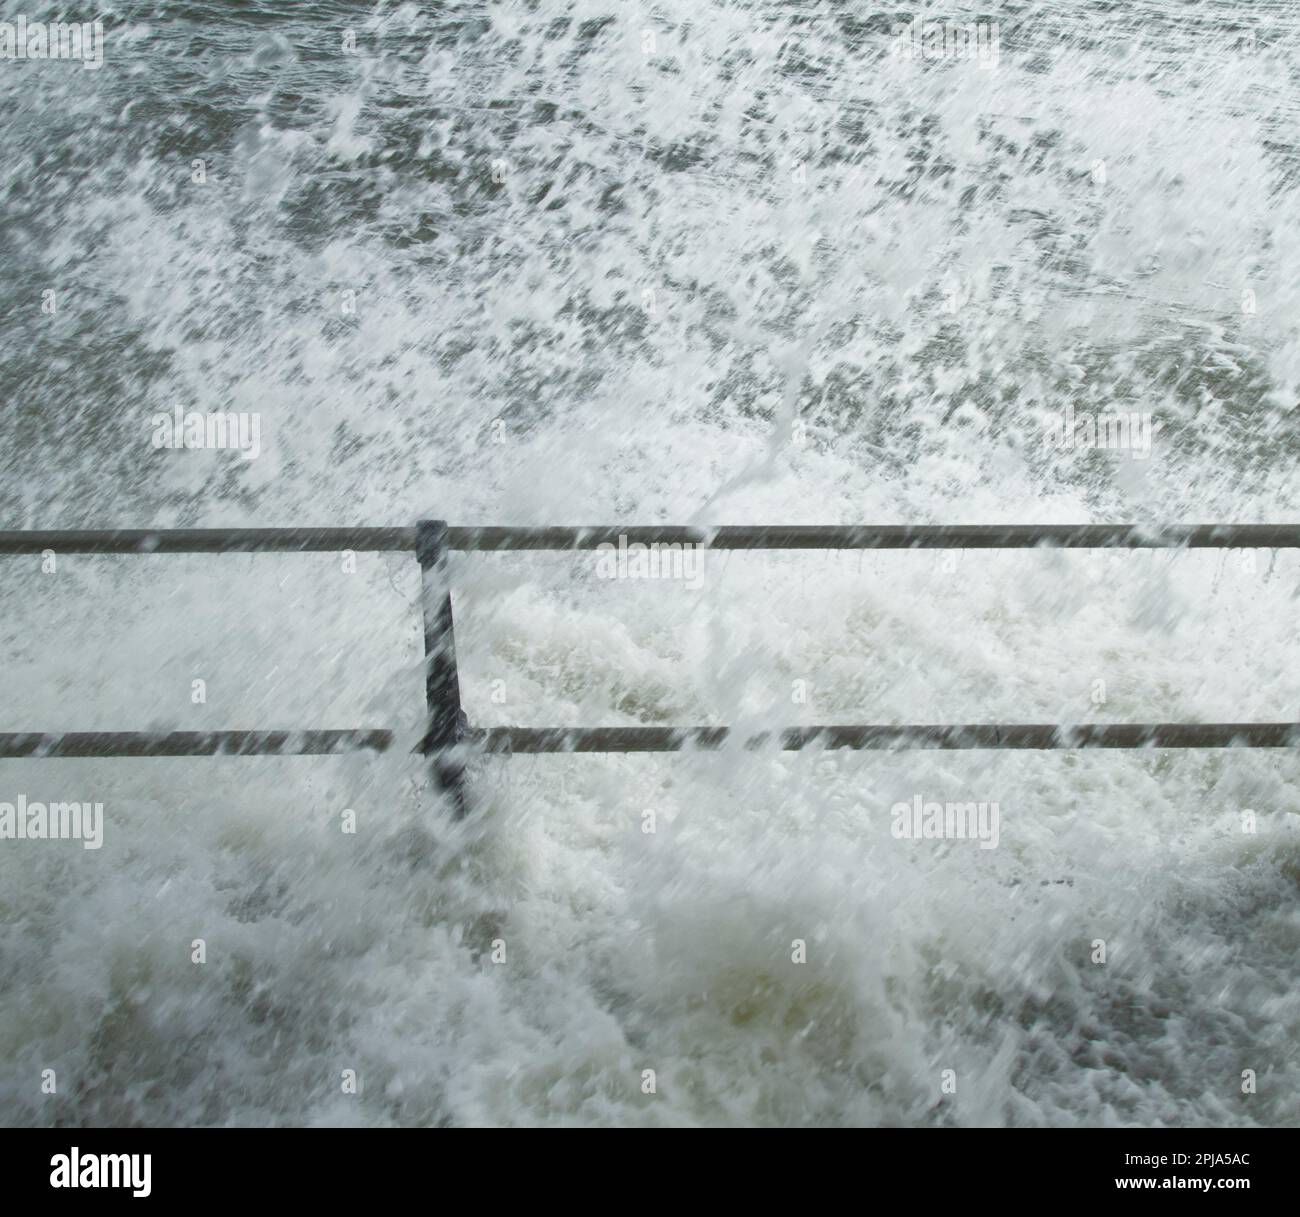 Waves Crashing Over A Metal Barrier During Storm Mathis In The Spring, Mudeford Quay, Christchurch UK Stock Photo